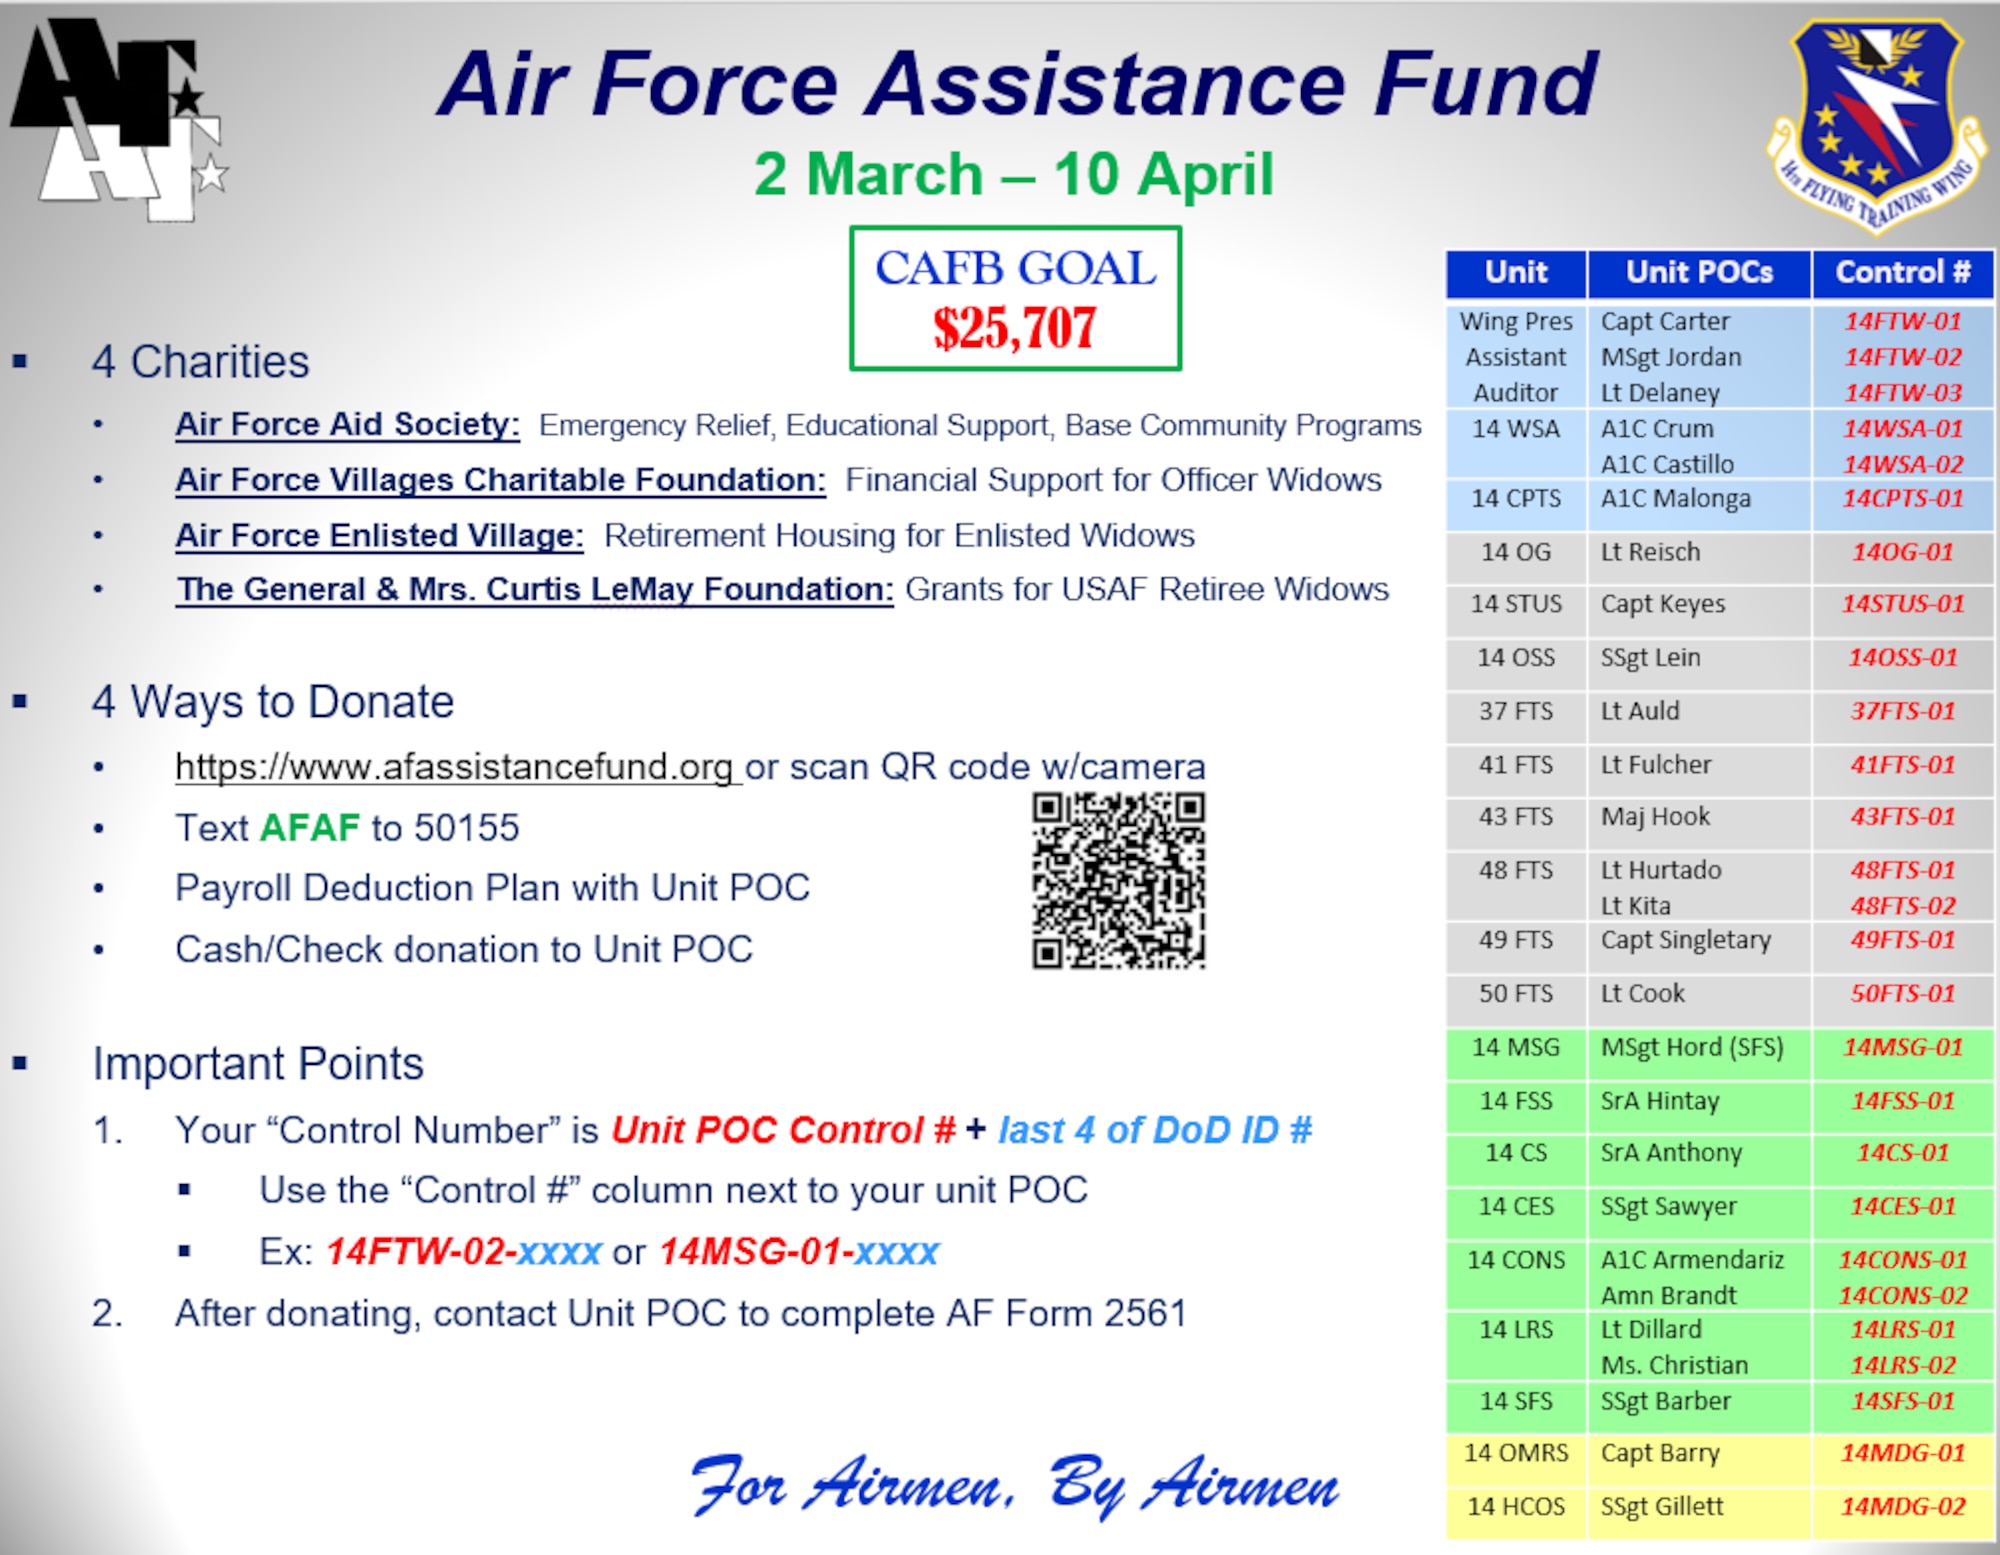 Columbus Air Force Base's Air Force Assistance Fund 2020 campaign information. (Courtesy photo)